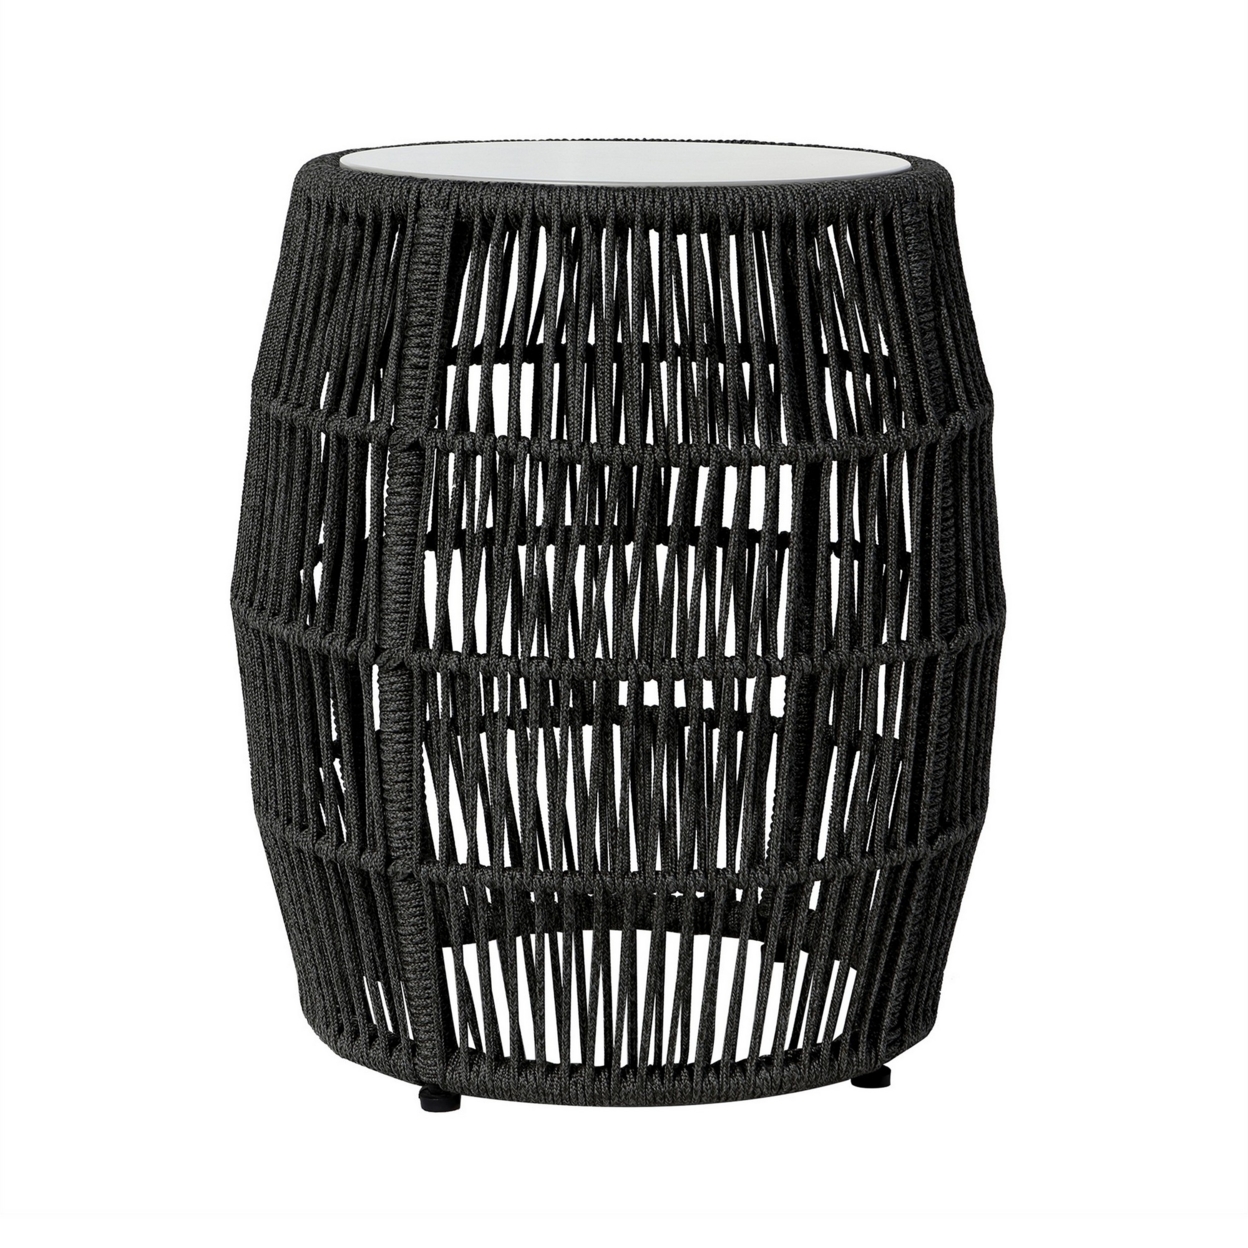 Gip 22 Inch Indoor Outdoor End Table, Round Stone Top, Woven Rope, Black- Saltoro Sherpi